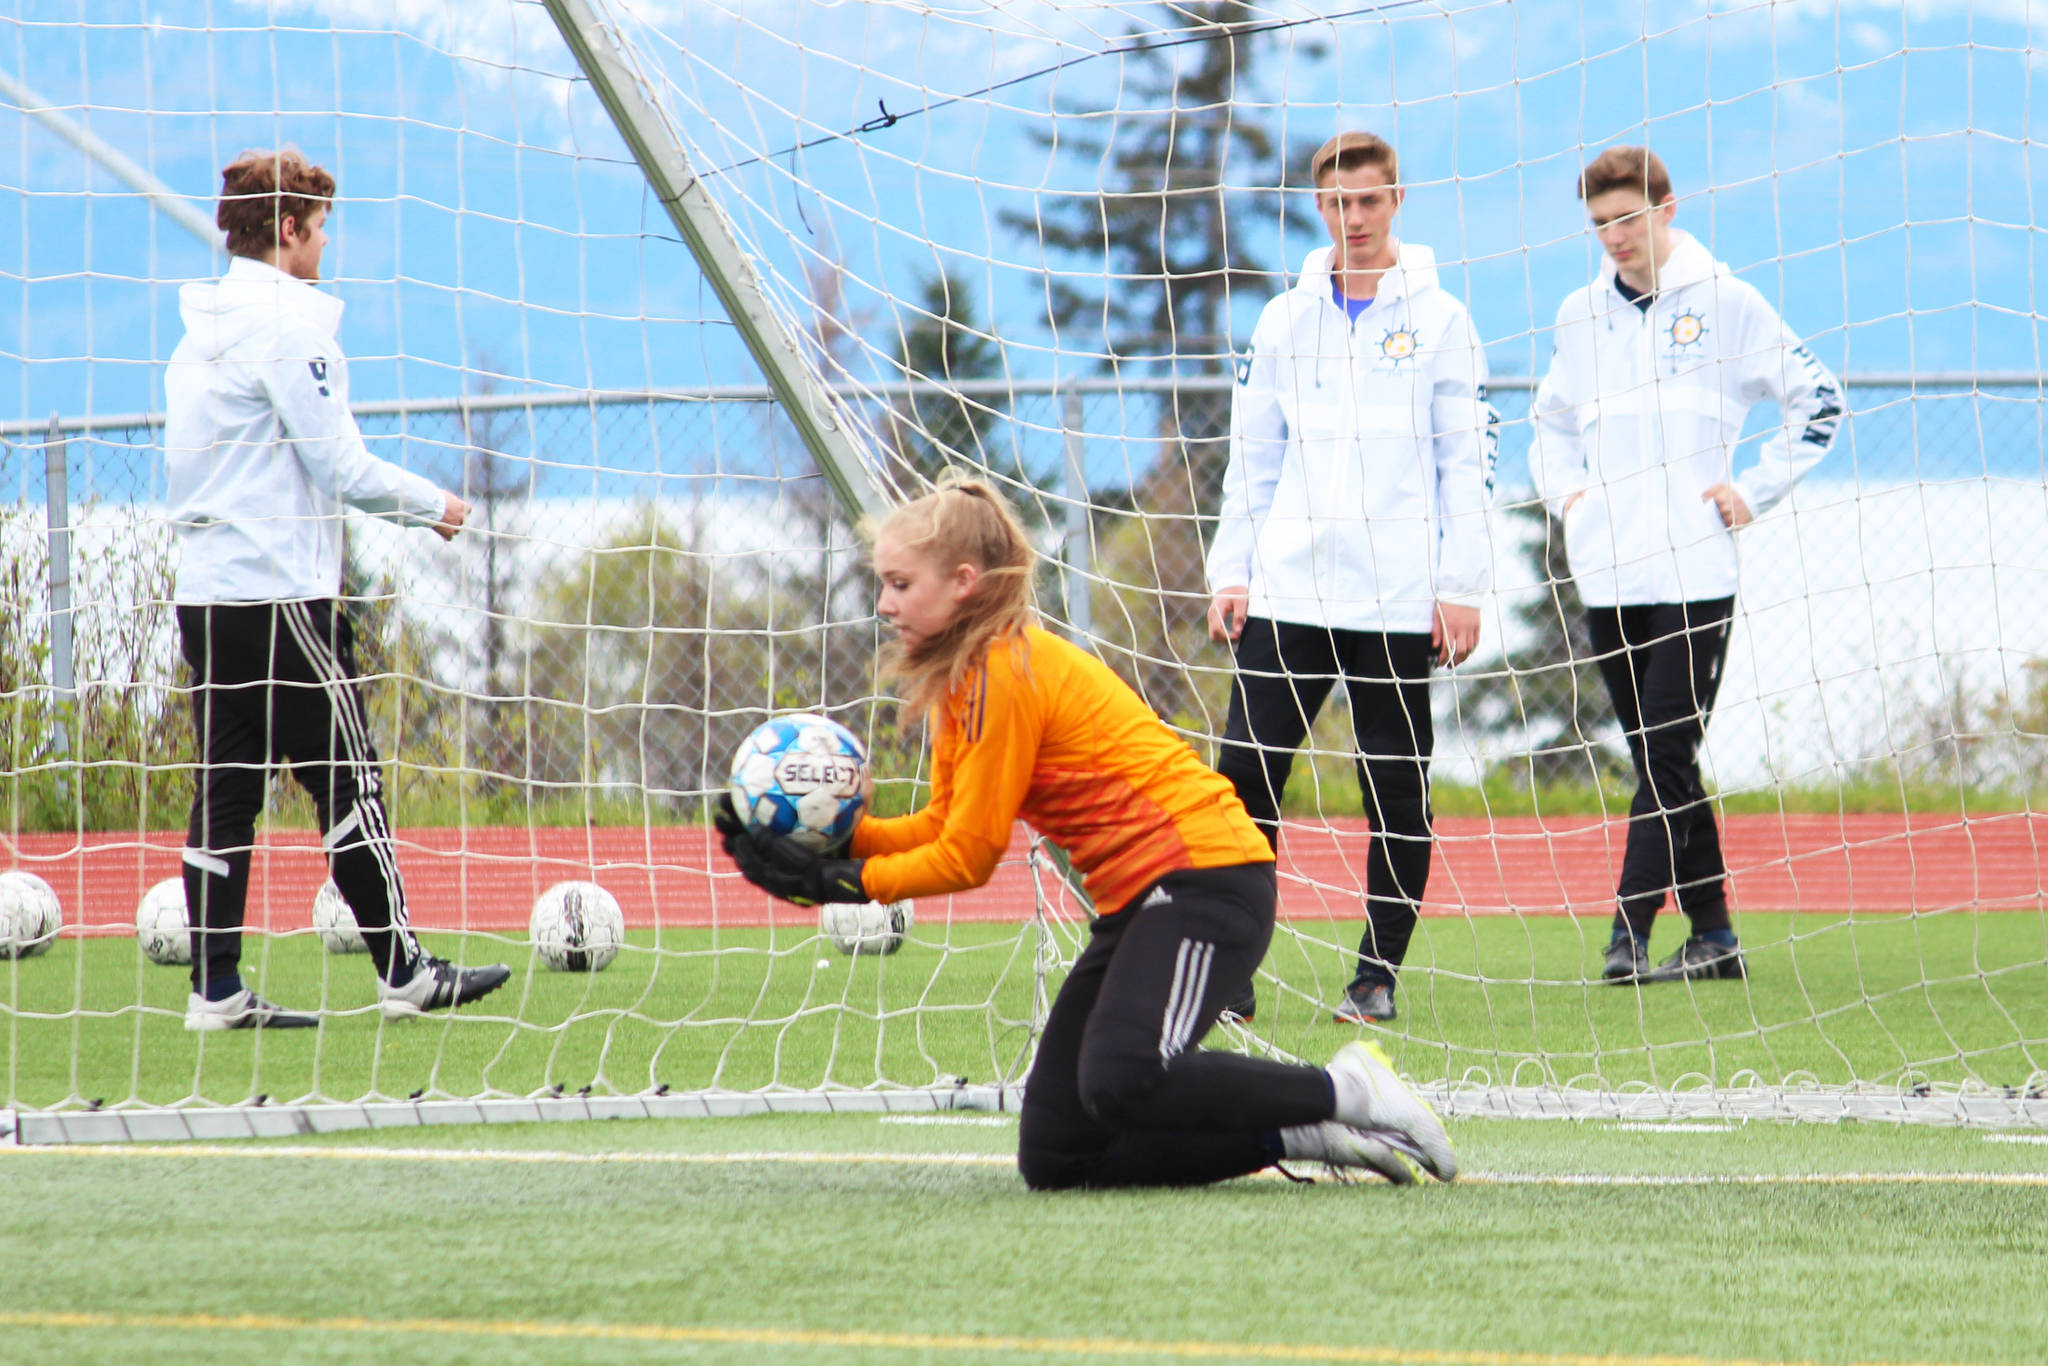 Homer’s Paige Jones saves a penalty kick from Soldotna during the girls championship game of the Peninsula Conference Soccer Tournament on Saturday, May 18, 2019 at Homer High School in Homer, Alaska. (Photo by Megan Pacer/Homer News)